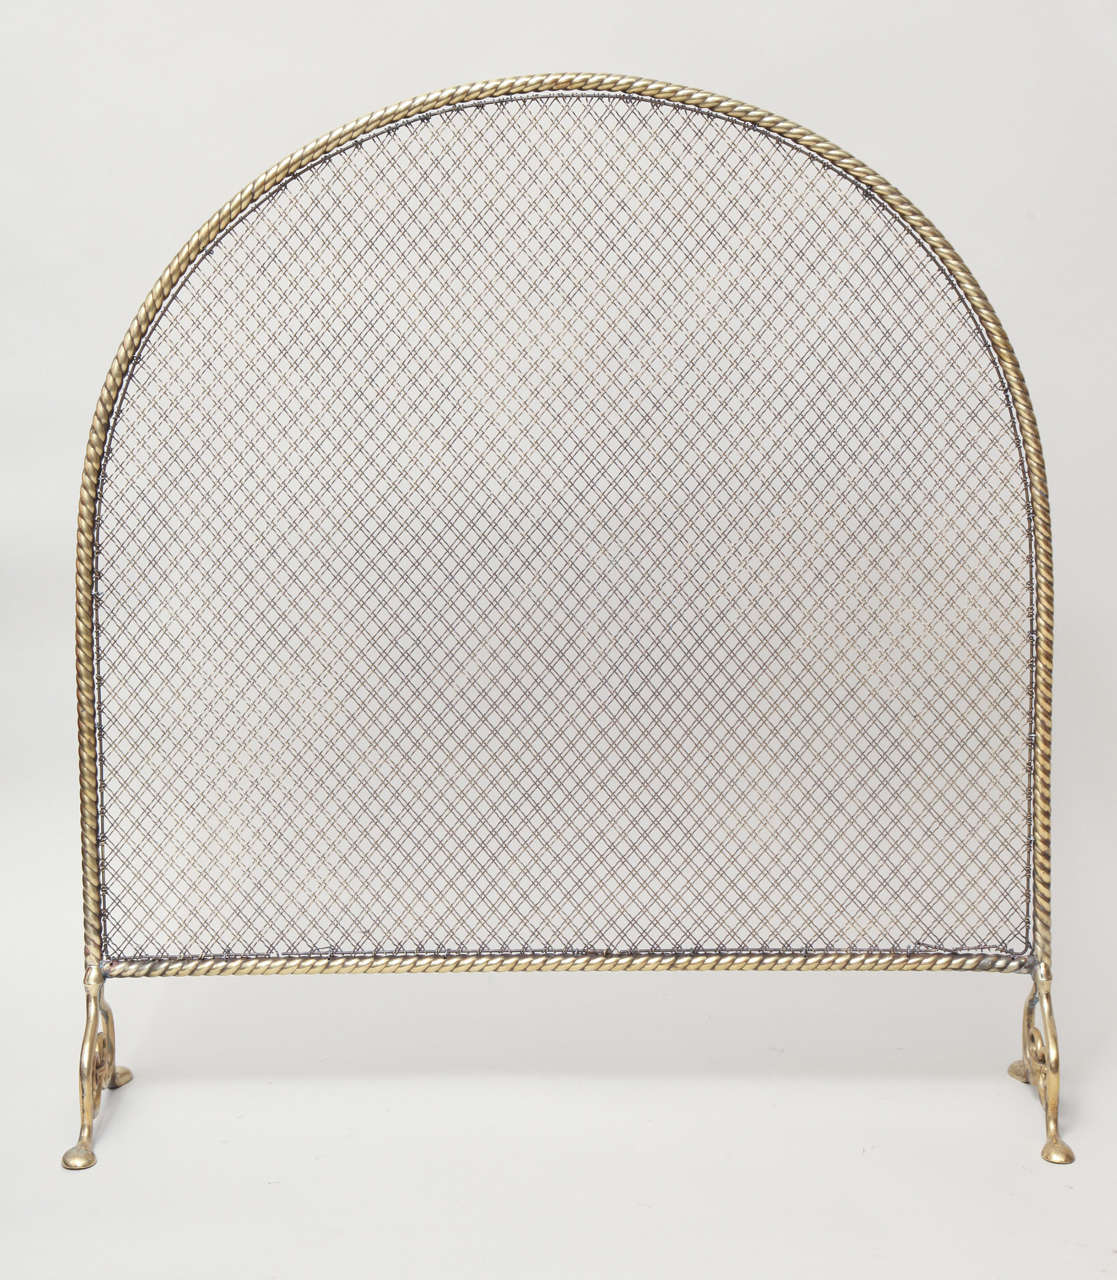 Unusual 19th Century arched fire screen having brass frame with rope twist design, standing on penny feet.